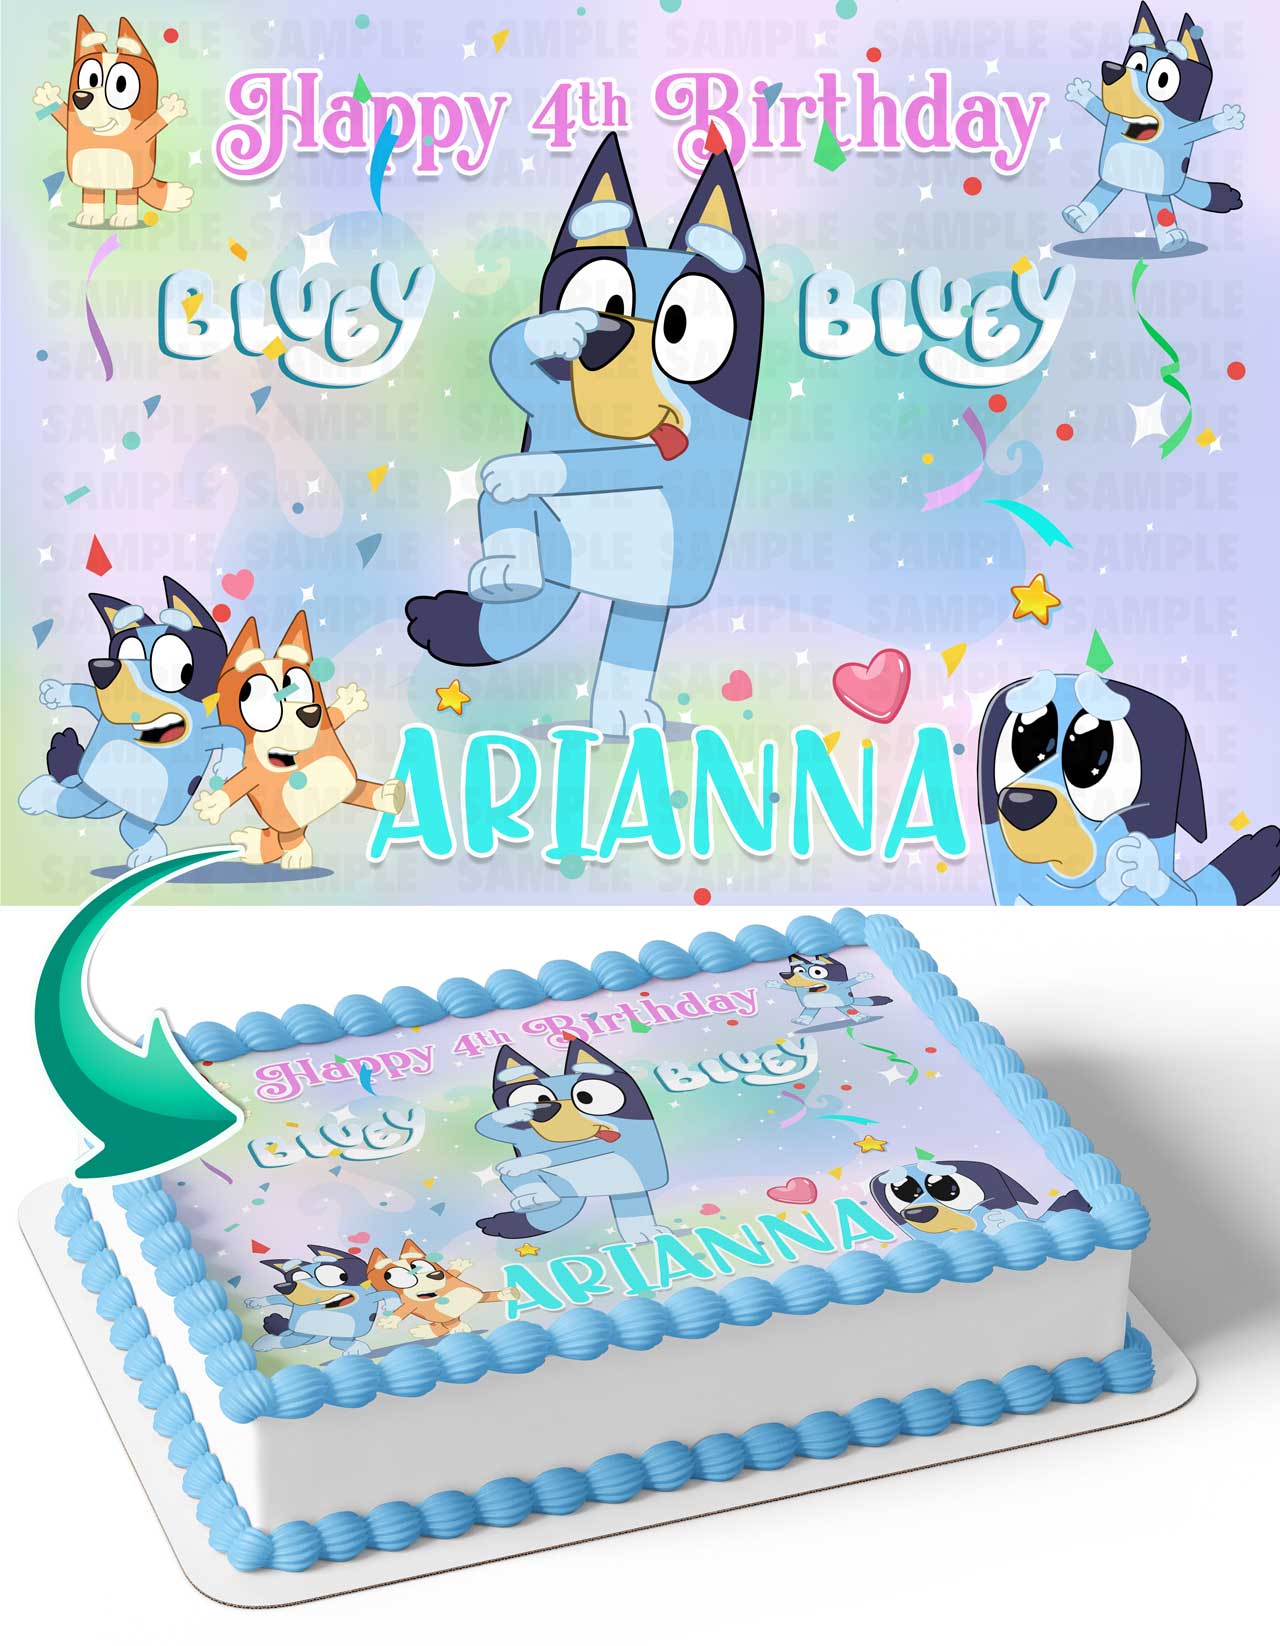 Bluey Birthday Party Supplies | Bluey Party Decorations | Bluey Party Supplies | Bluey Birthday Decorations Cake for 16